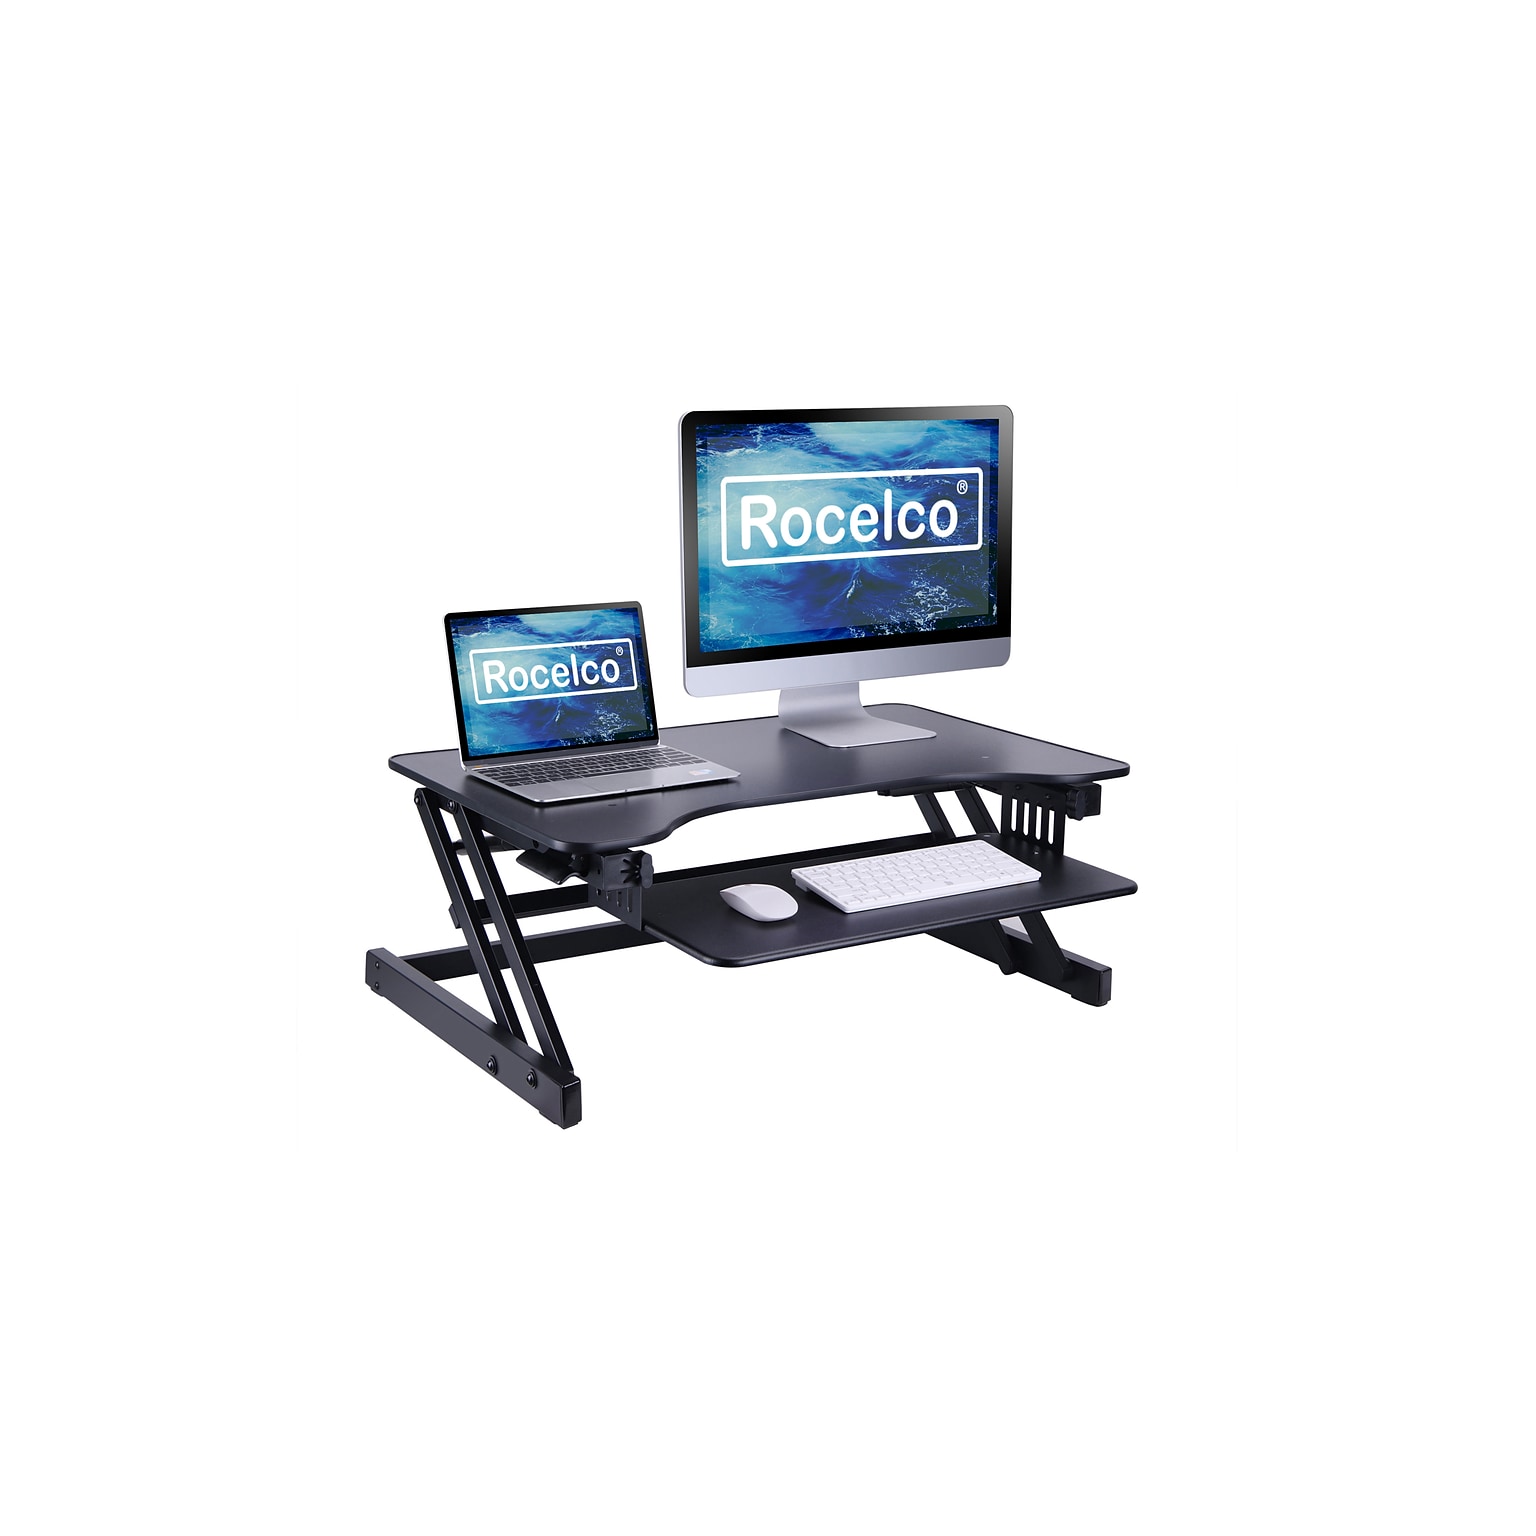 Rocelco 32W 5-17H Height Adjustable Standing Desk Converter, Sit Stand Up Dual Monitor Riser, Black (R ADRB)